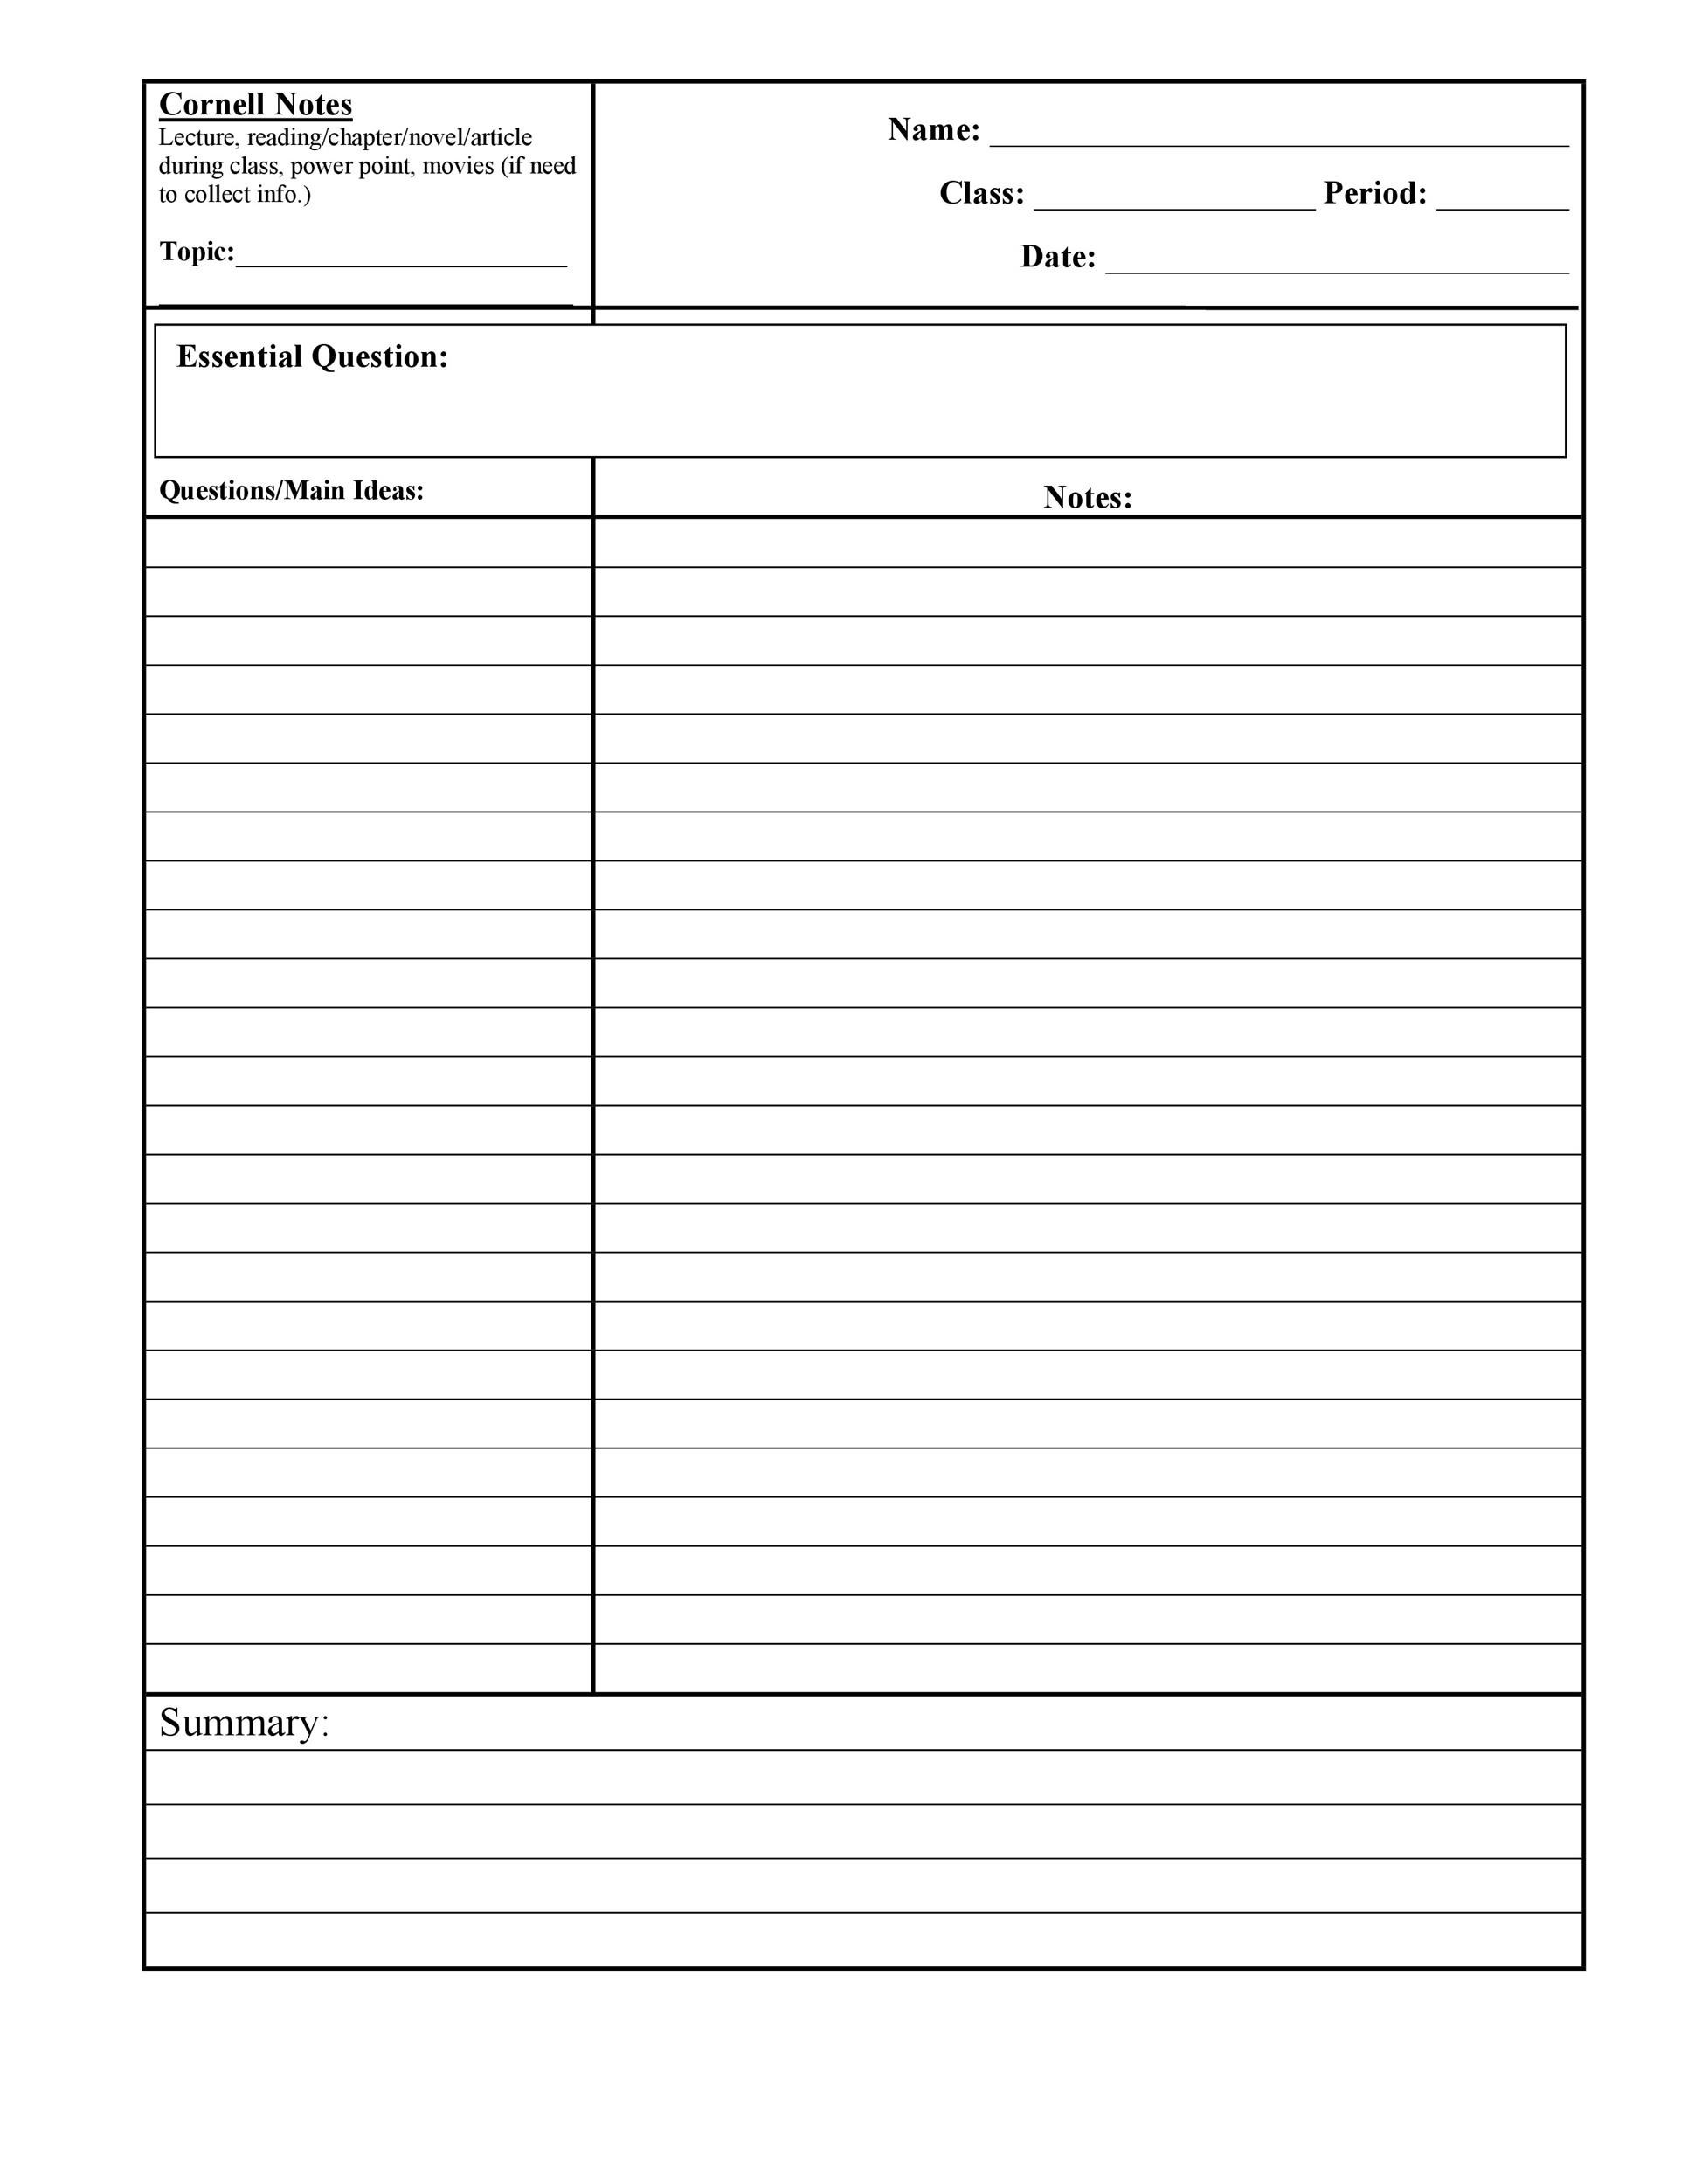 36 Cornell Notes Templates Examples Word PDF TemplateLab